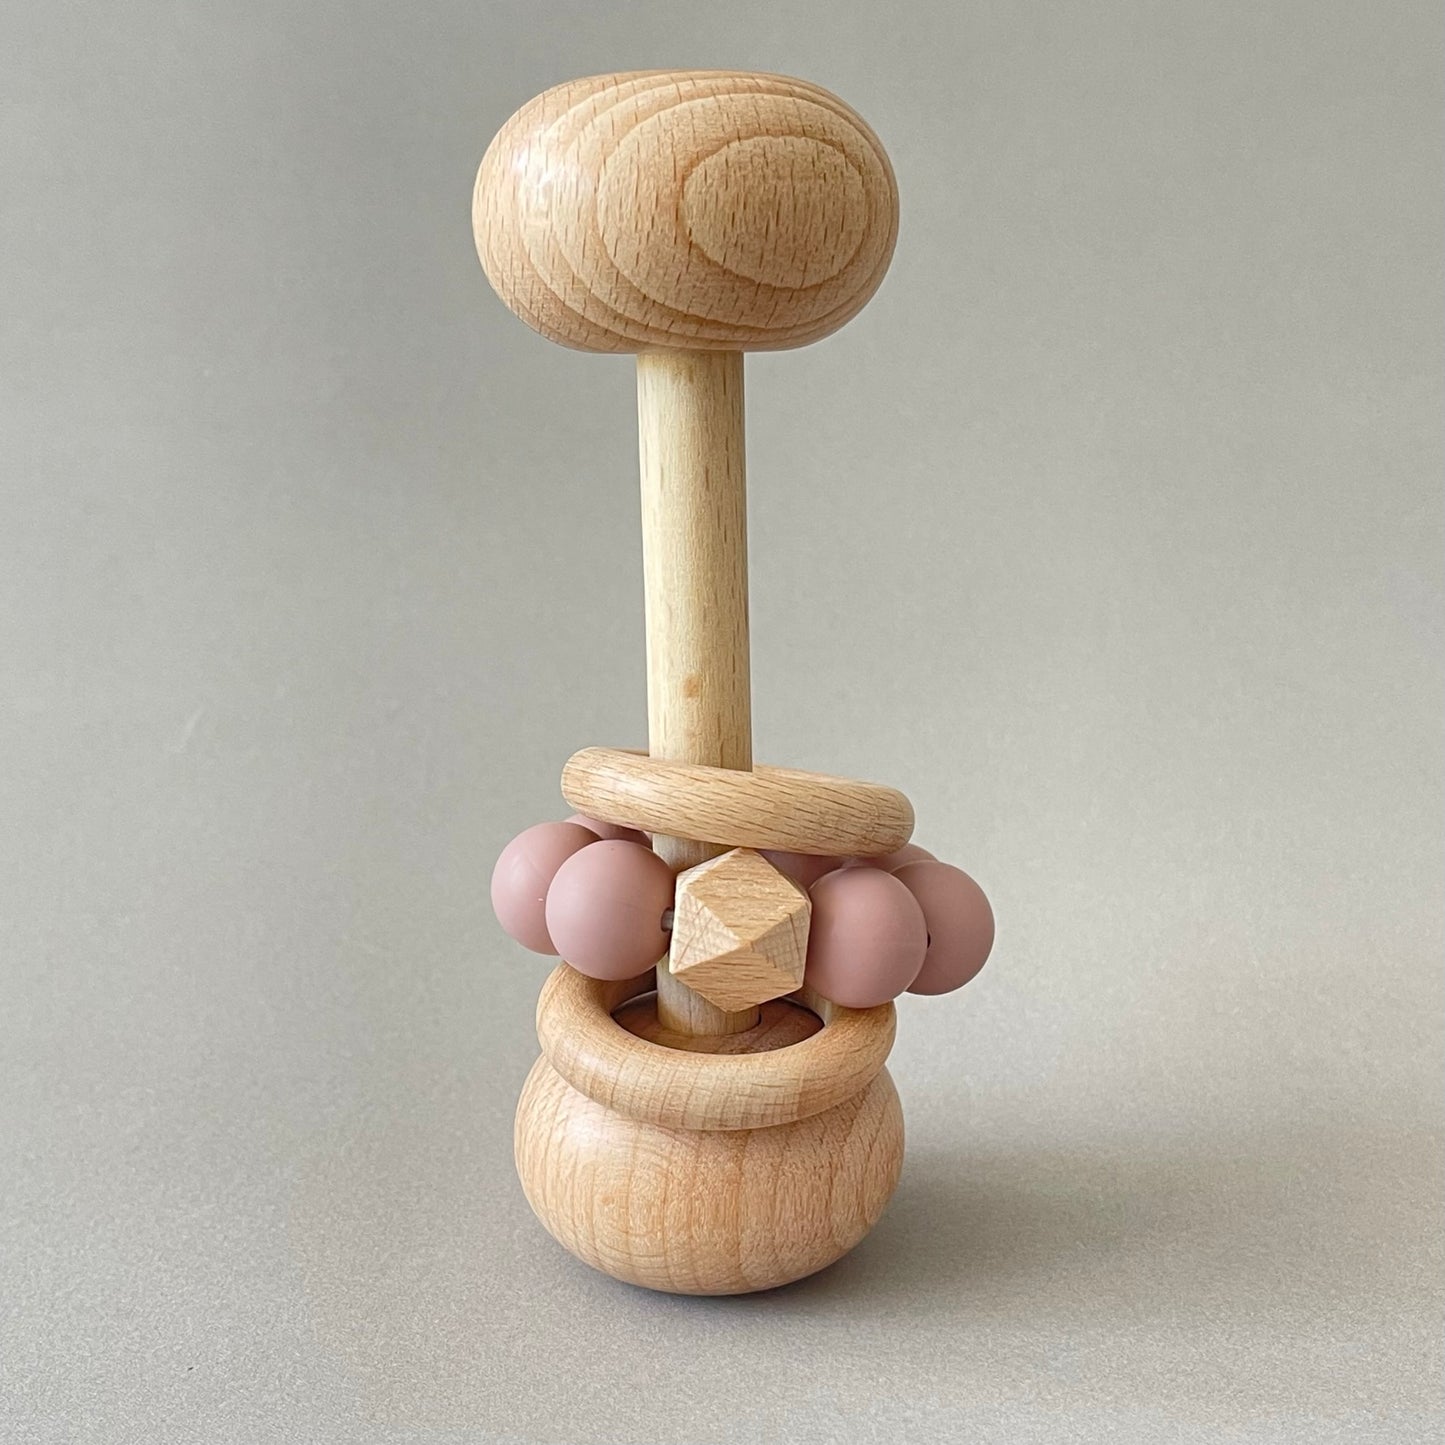 Wooden Rattle Toys for Babies with (Blush) Silicone Beads